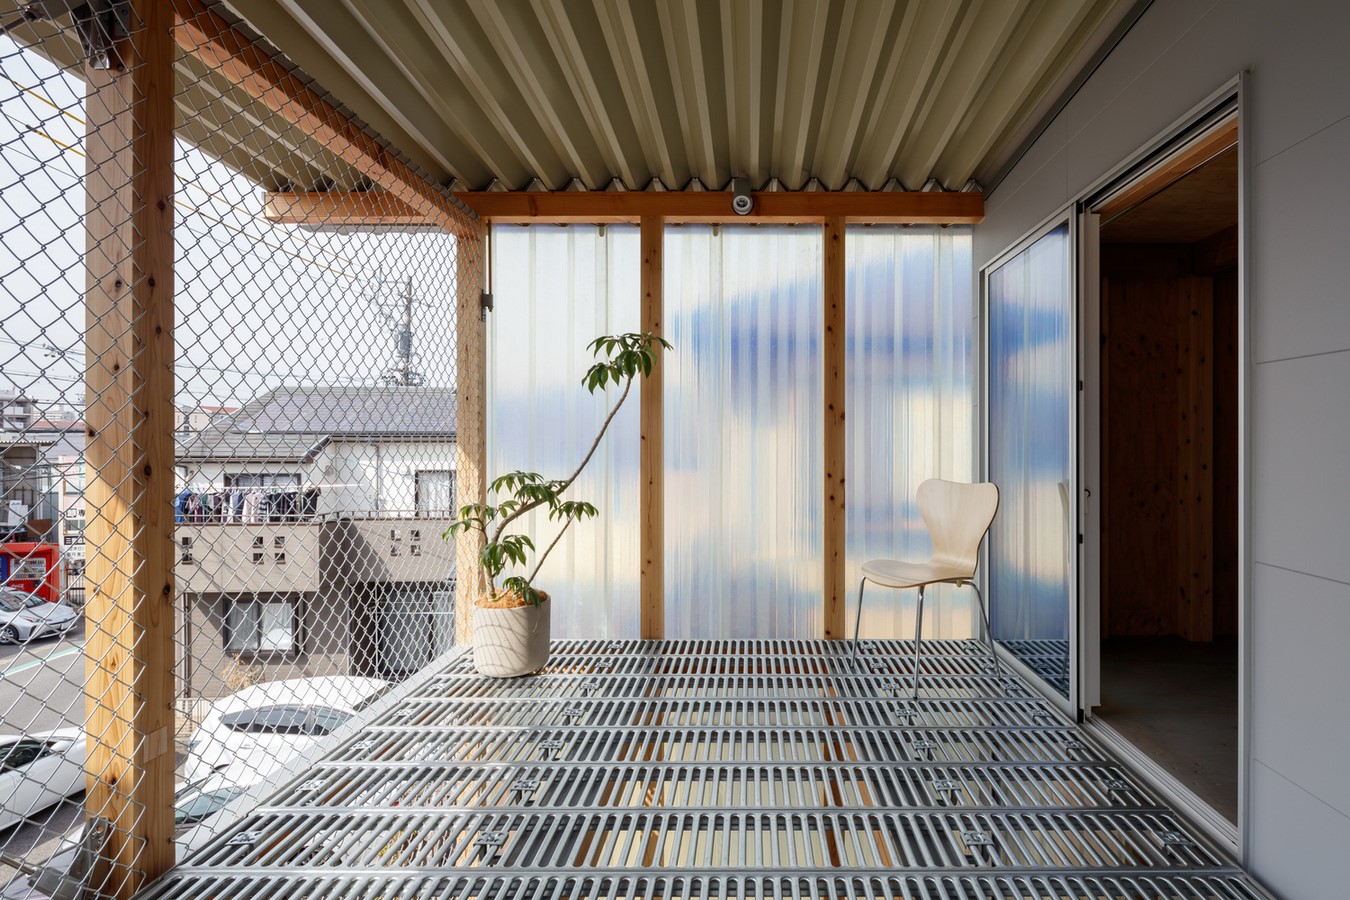 15 Japanese Small Houses That Are Beautifully Designed - Sheet39